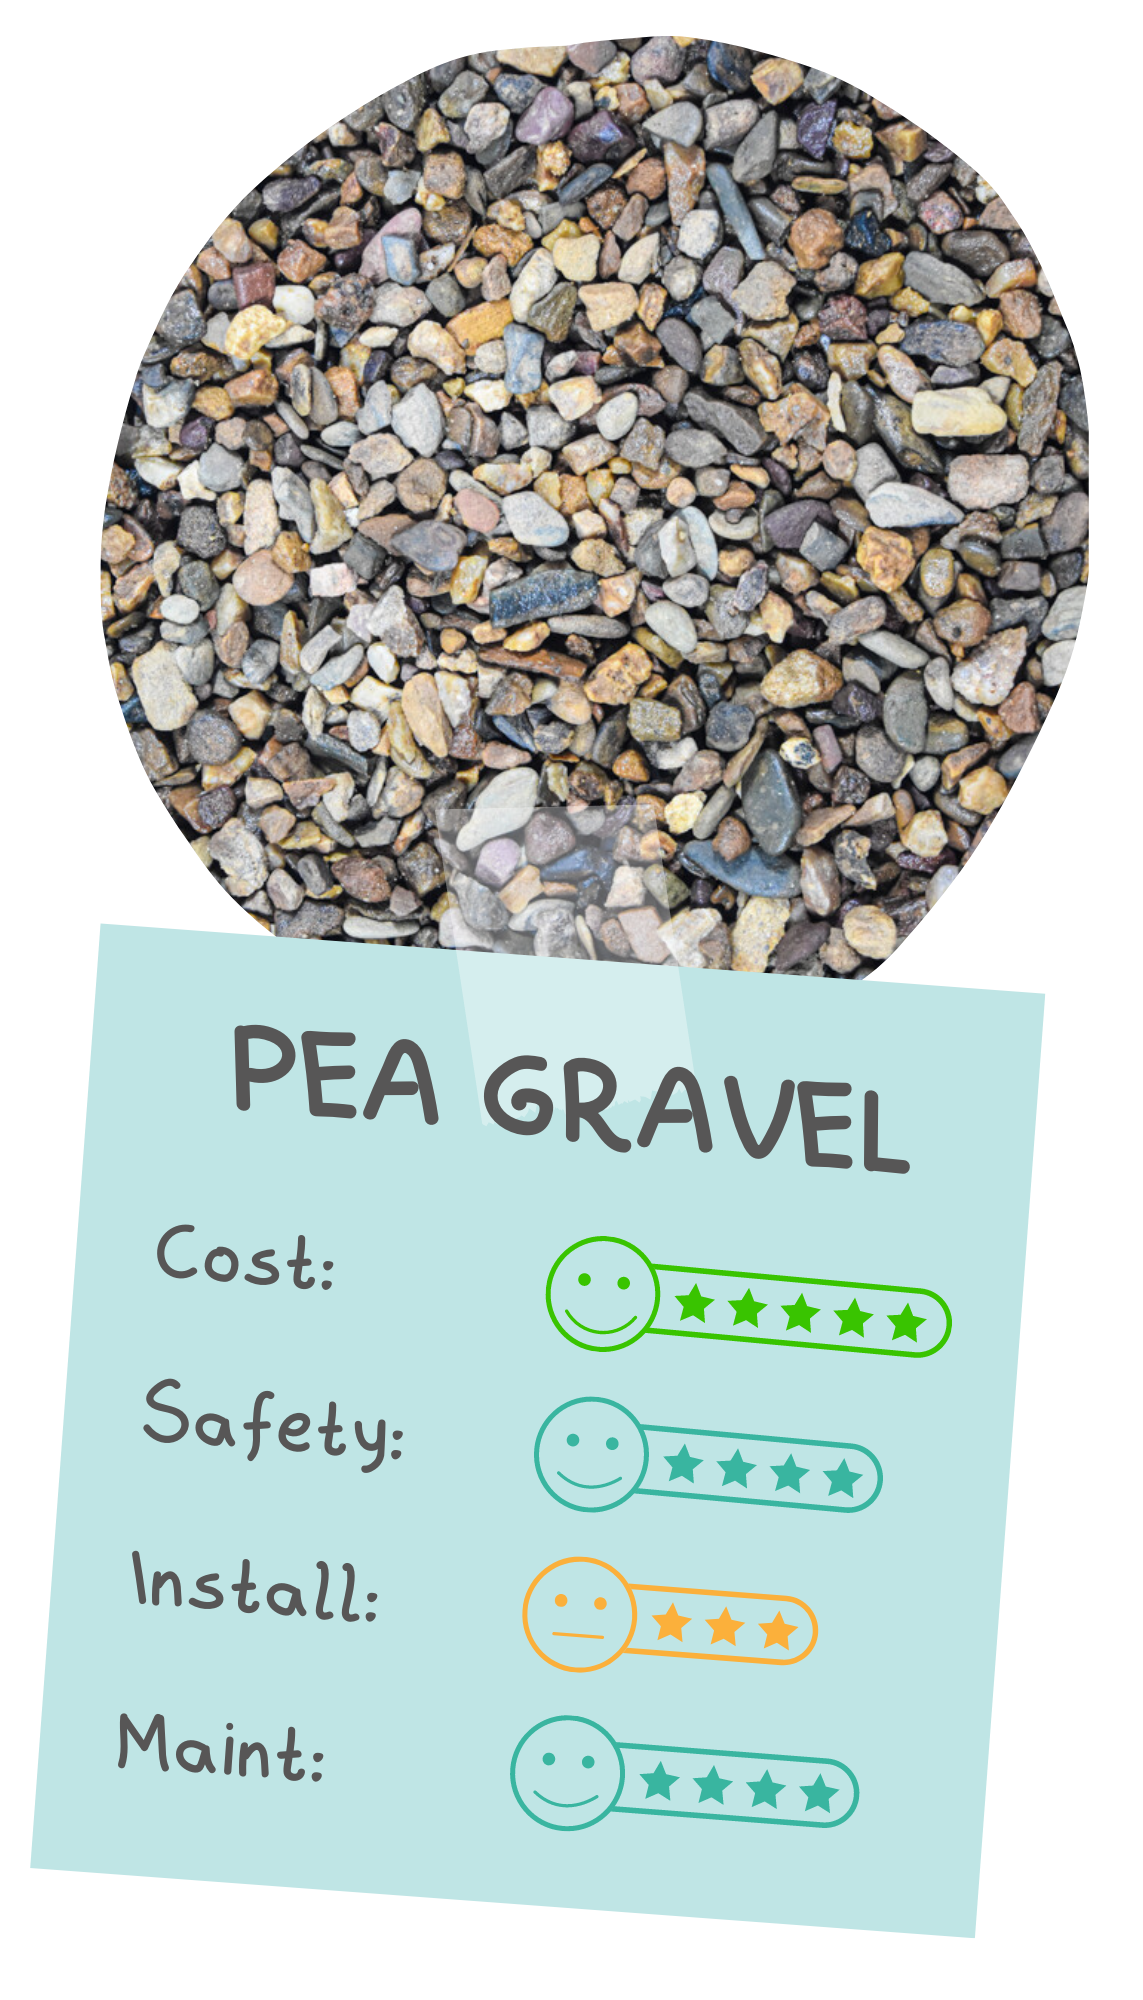 Pea gravel is rated by four categories. It receives 5 stars for cost, 4 stars for safety, 3 stars for installation, and 4 stars for maintenance.